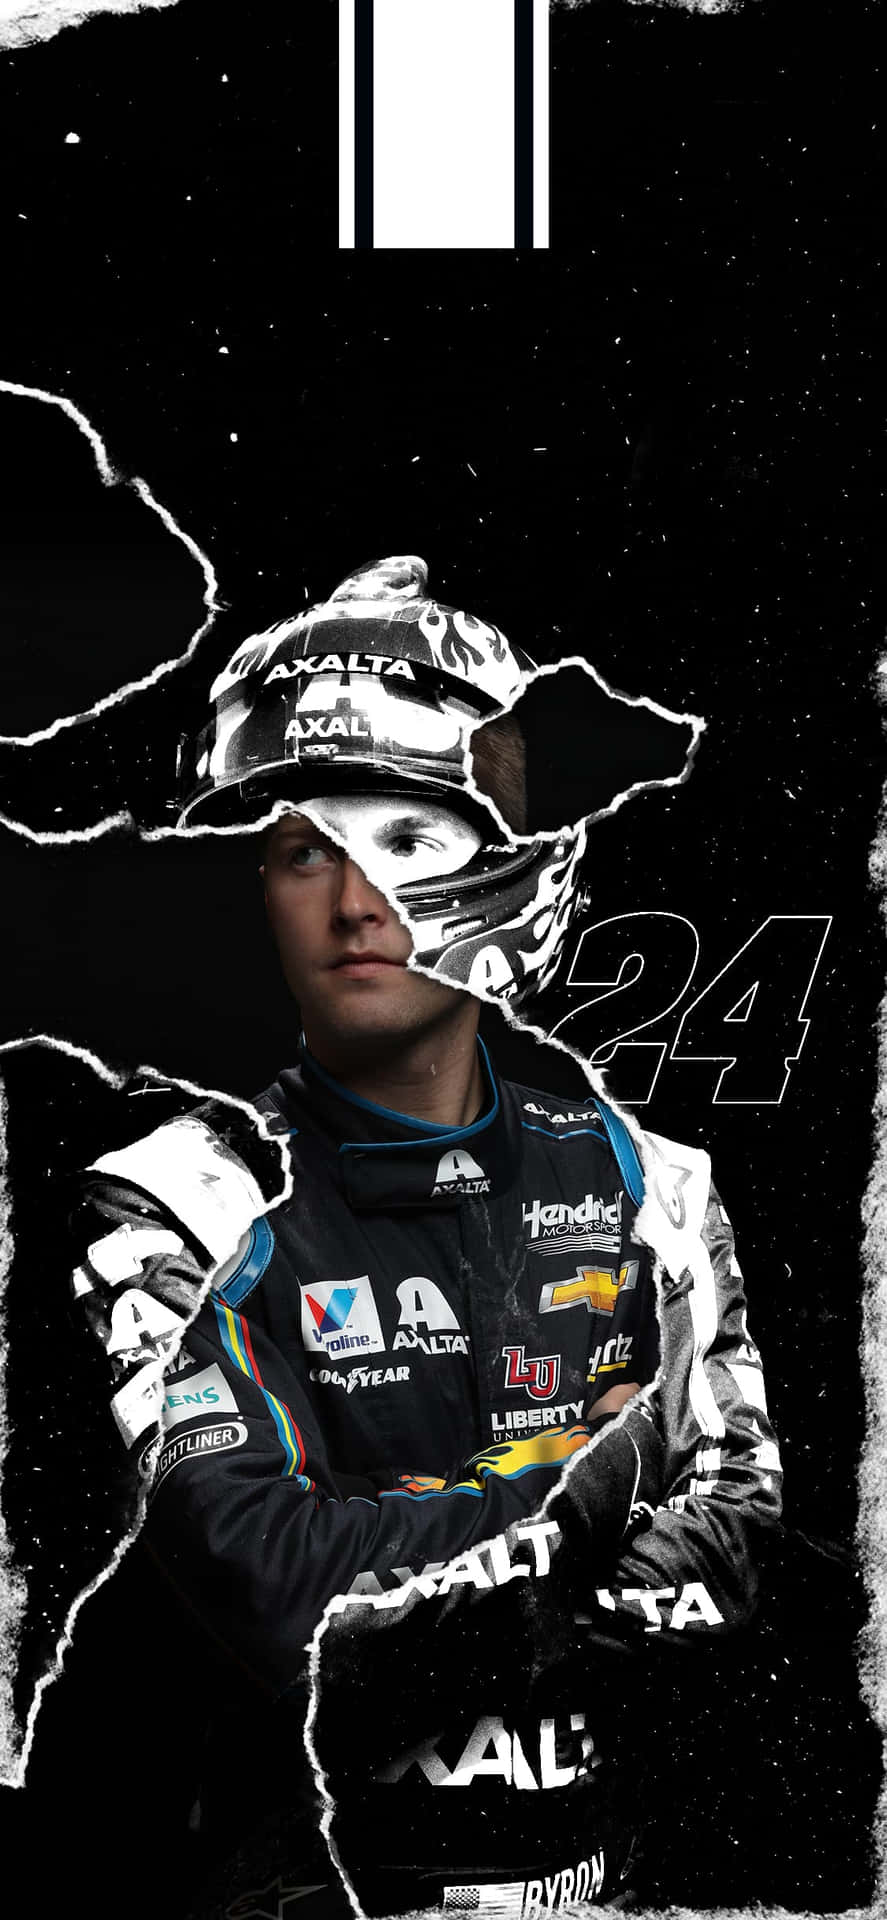 Get that competitive edge with the NASCAR iPhone Wallpaper